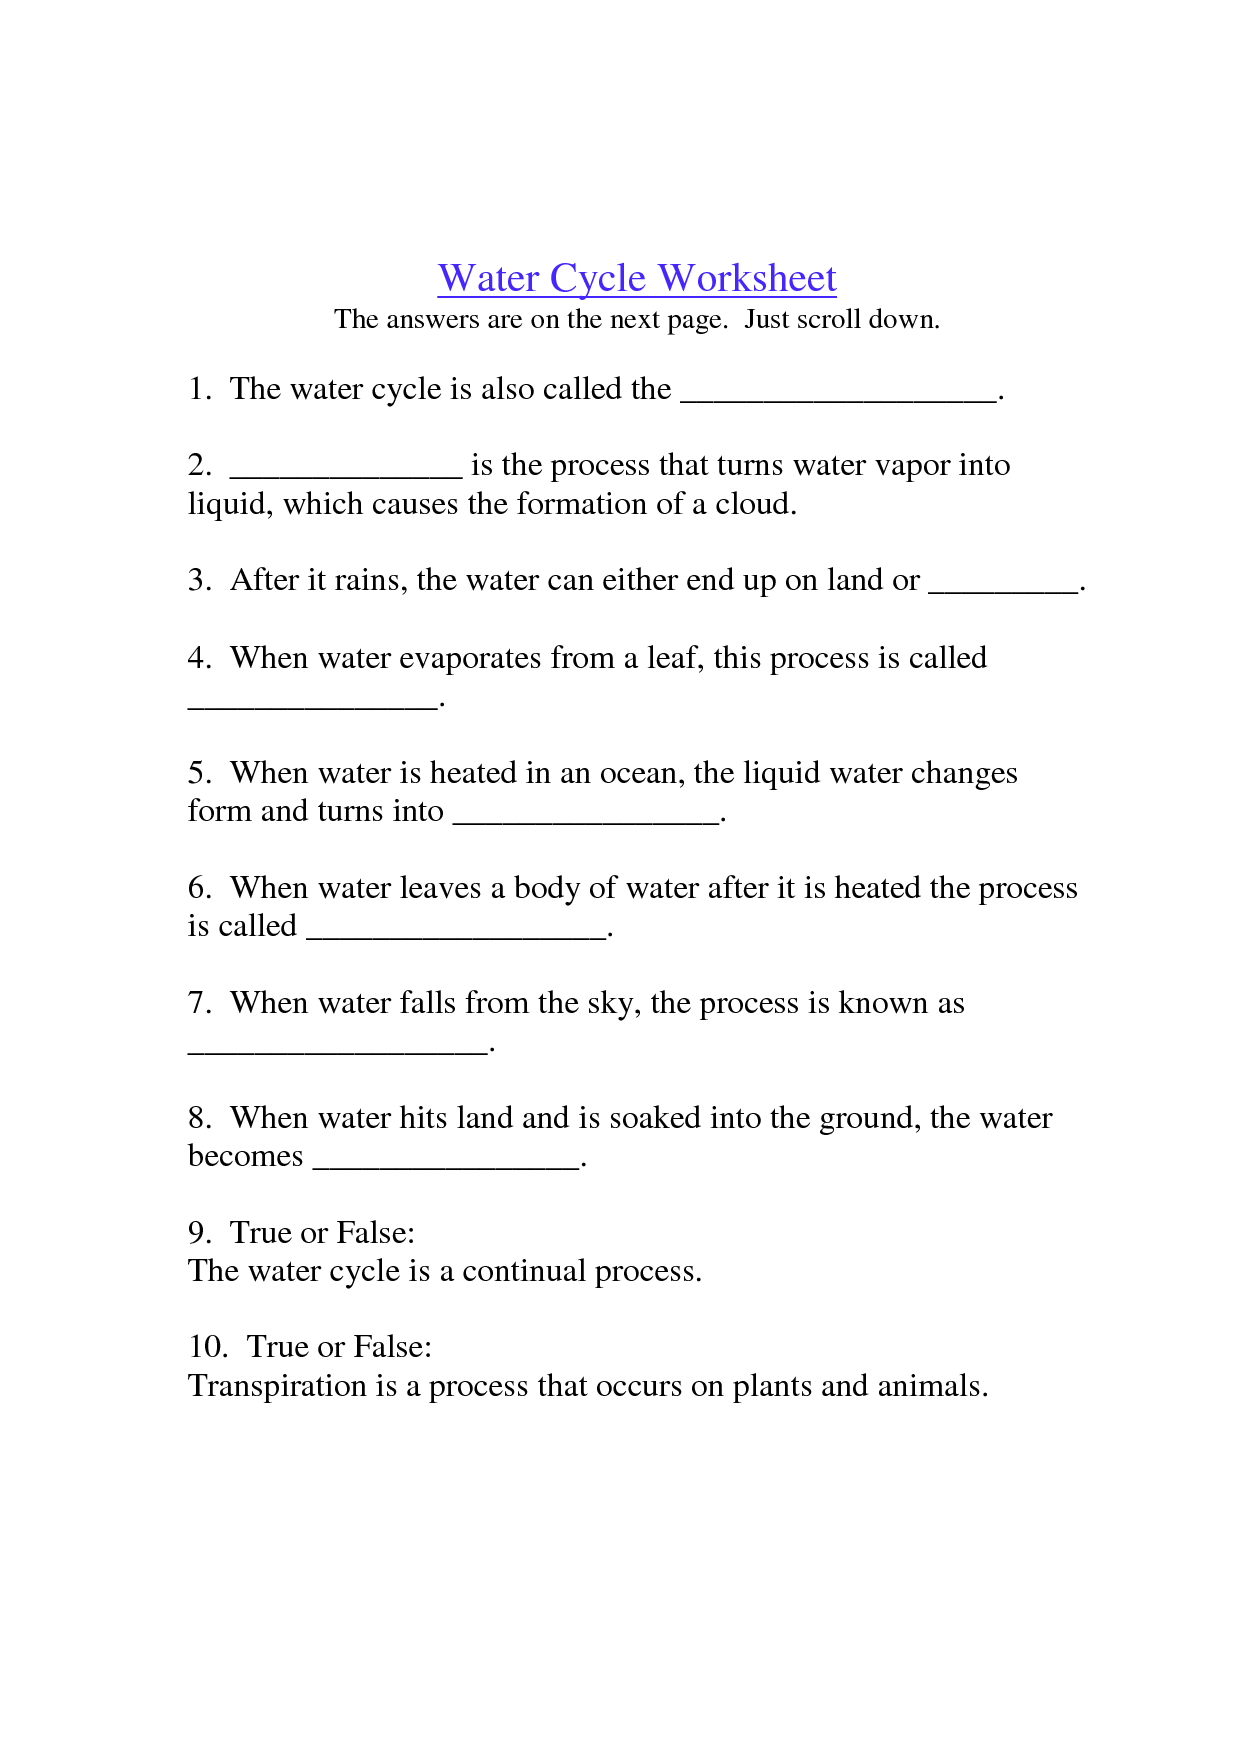 Water Cycle Worksheet Answers